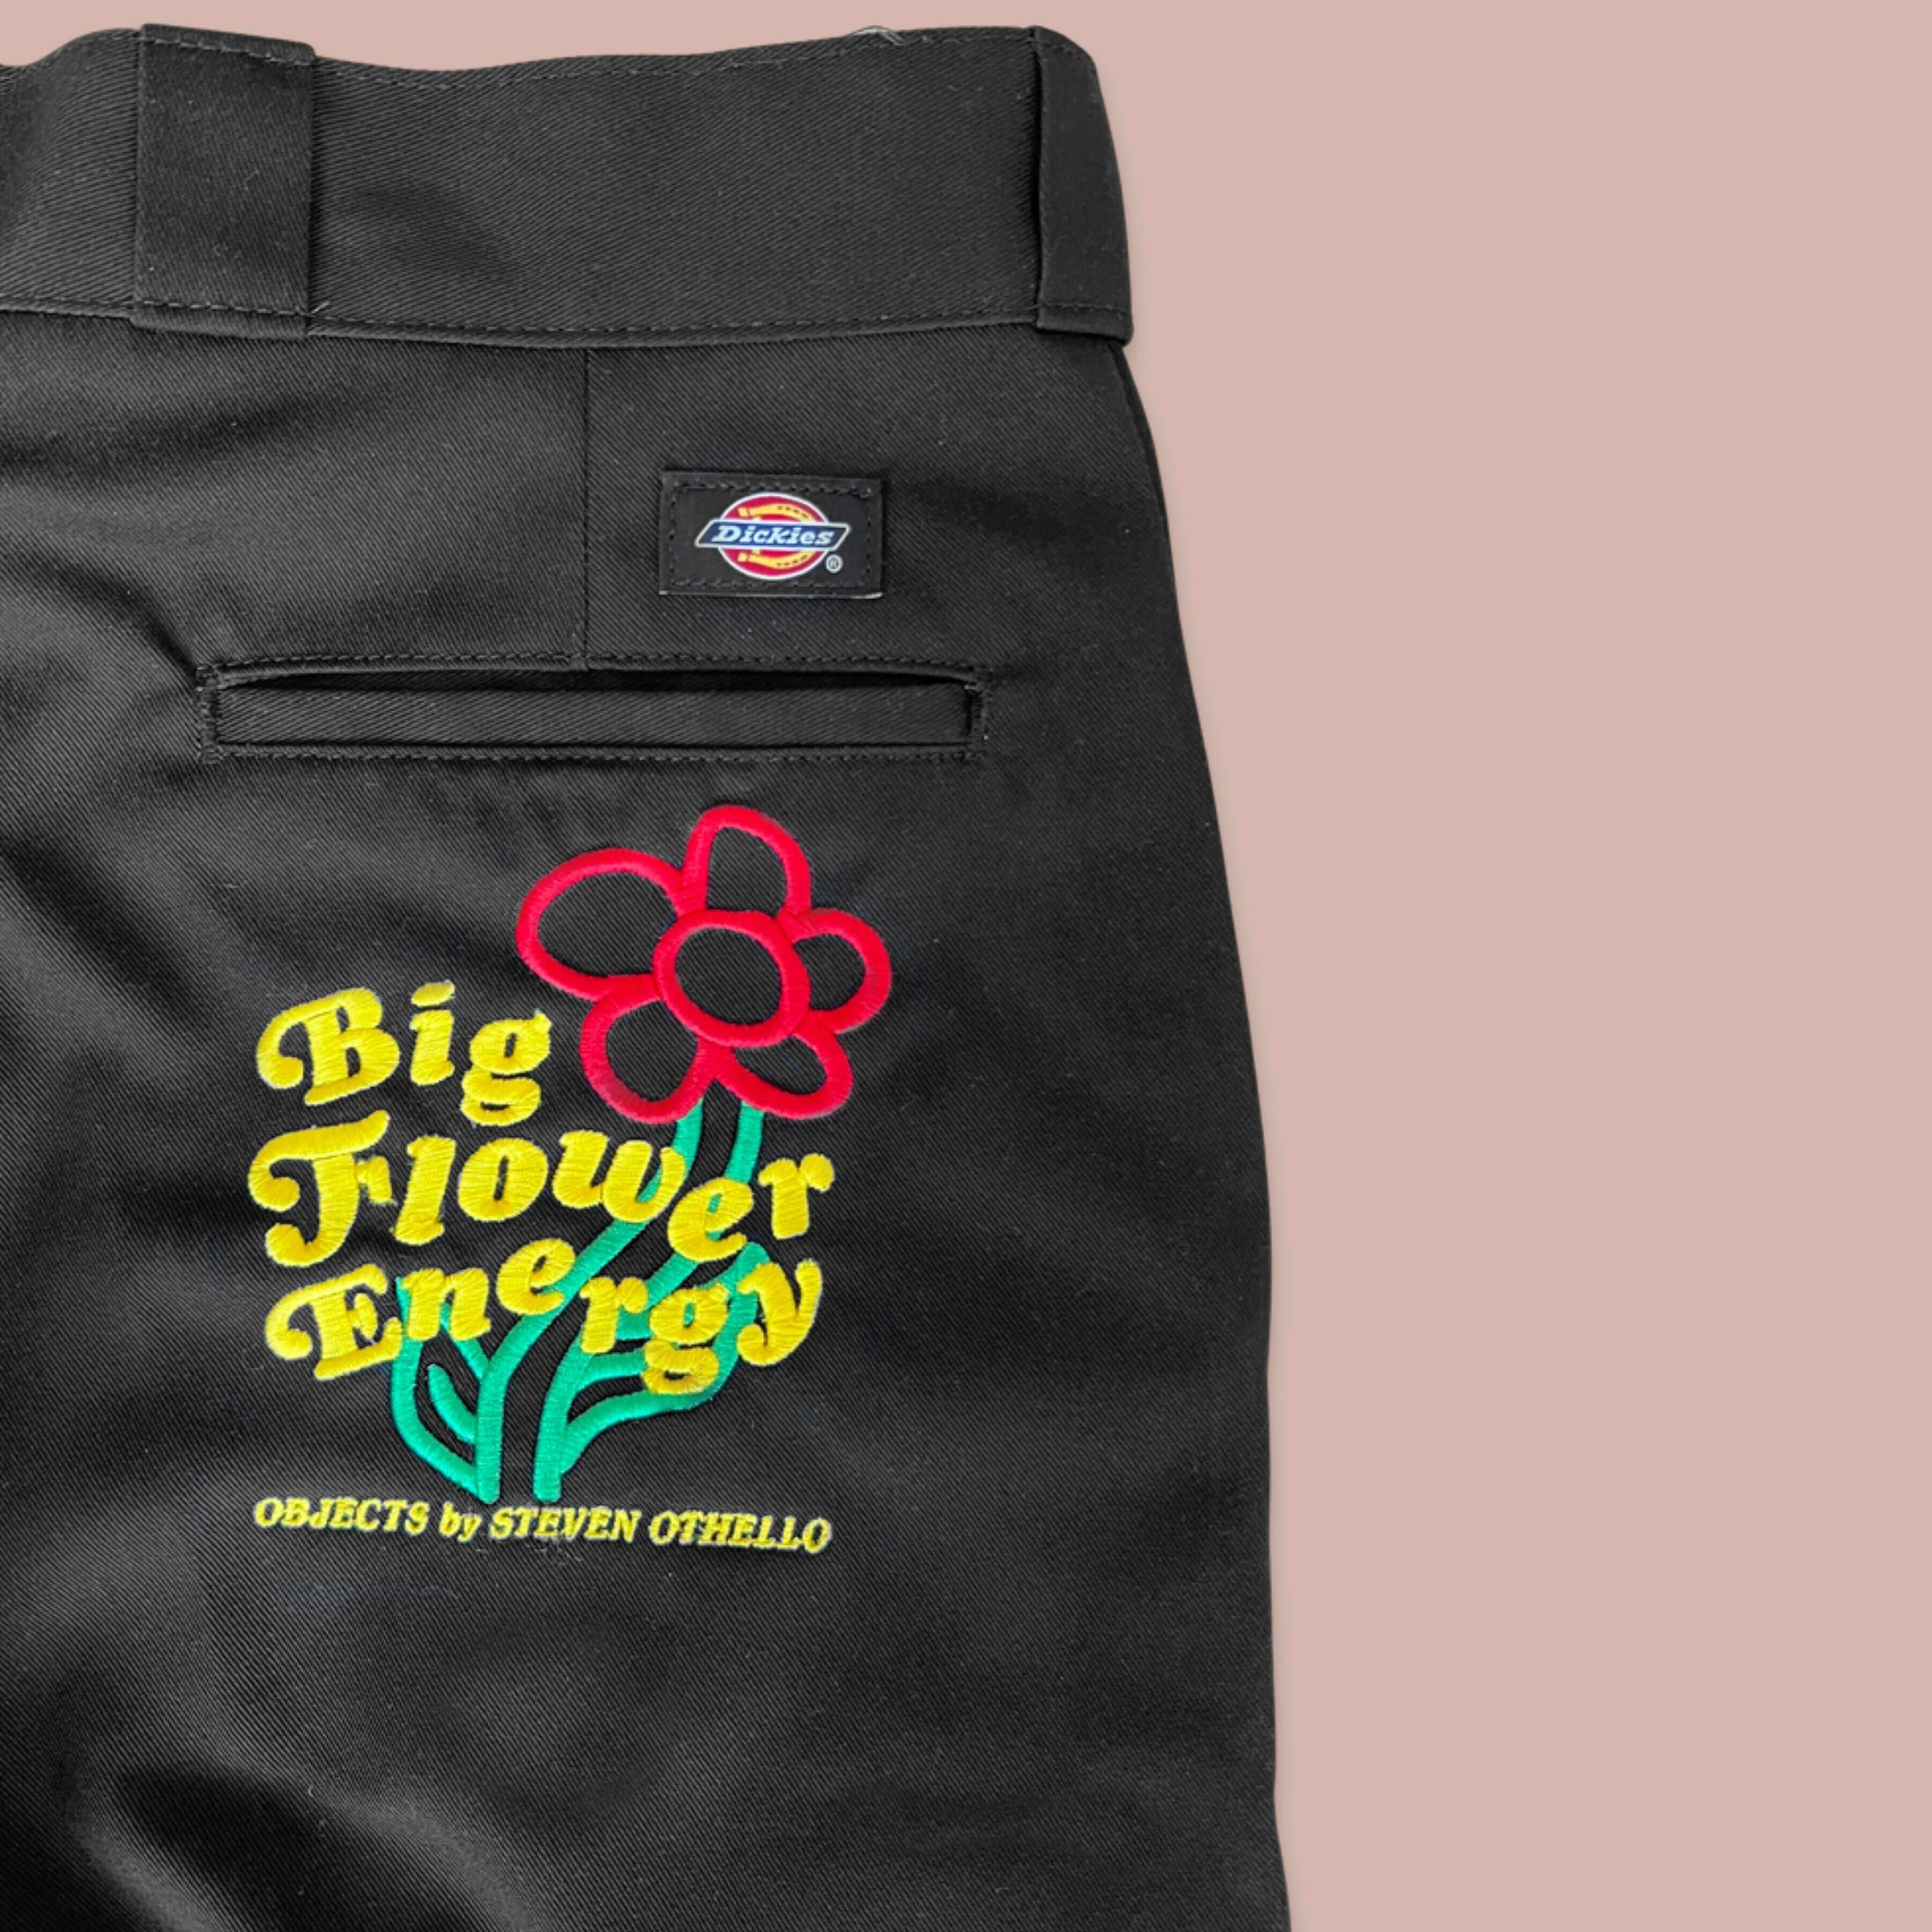 Big Flower Energy Flared Workwear Pants by Steven Othello x Dickies